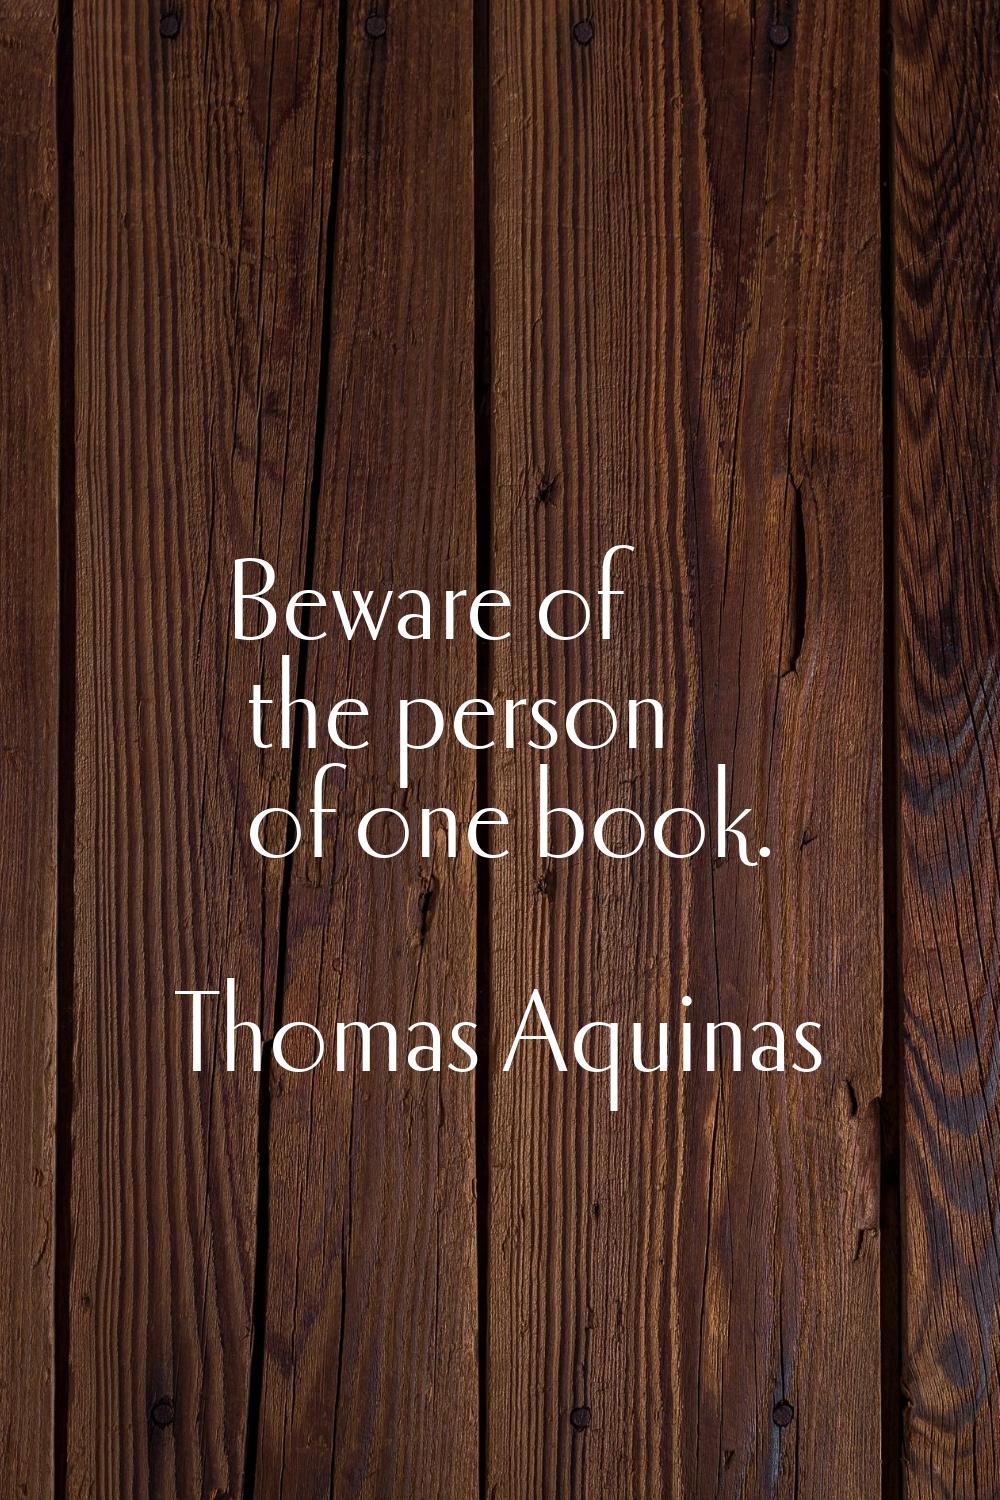 Beware of the person of one book.